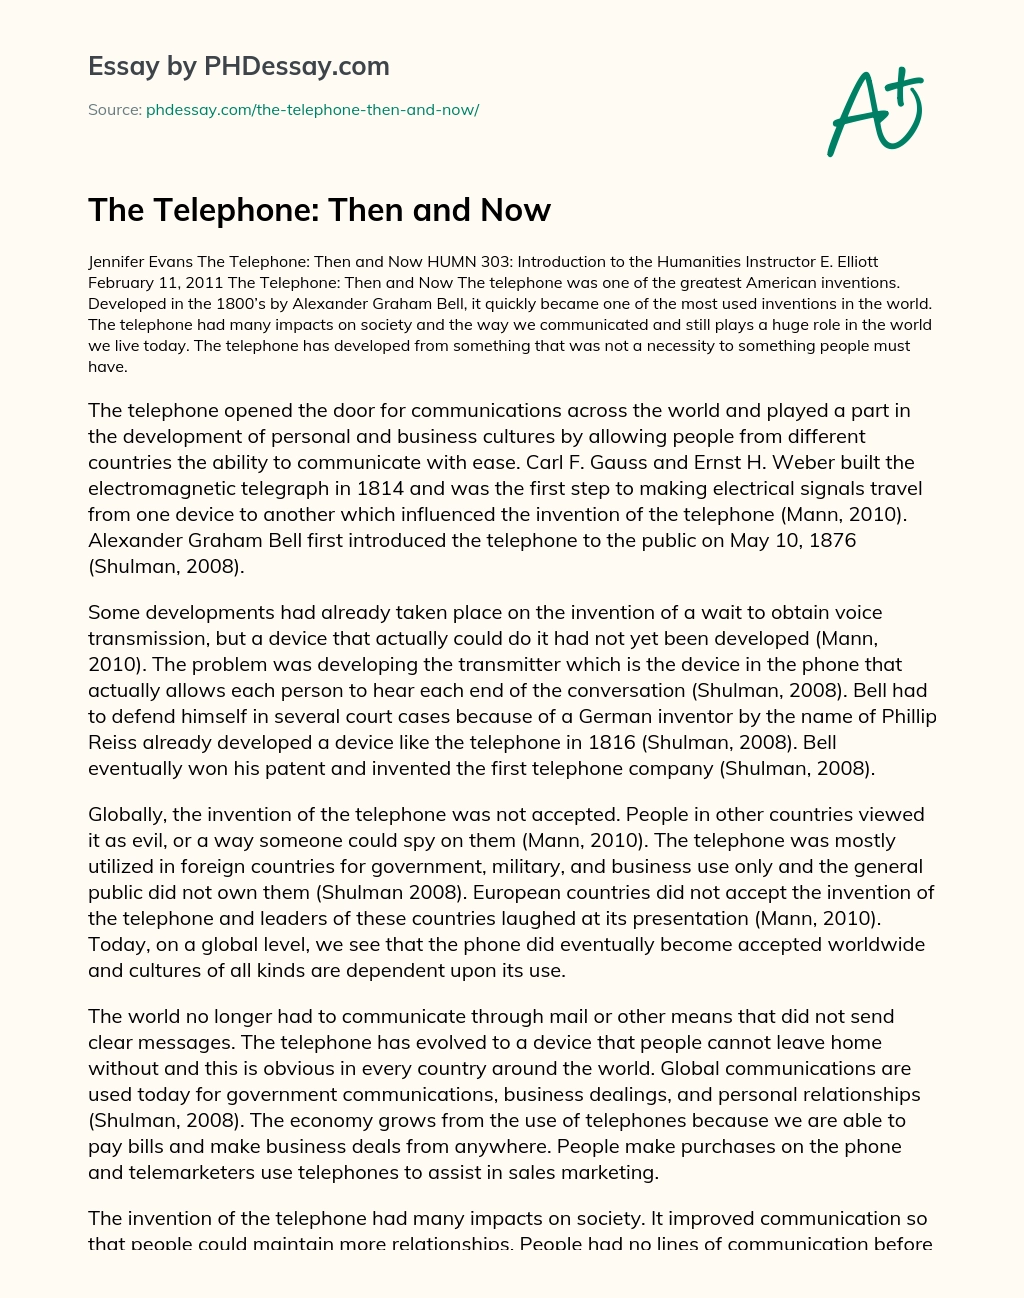 The Telephone: Then and Now essay